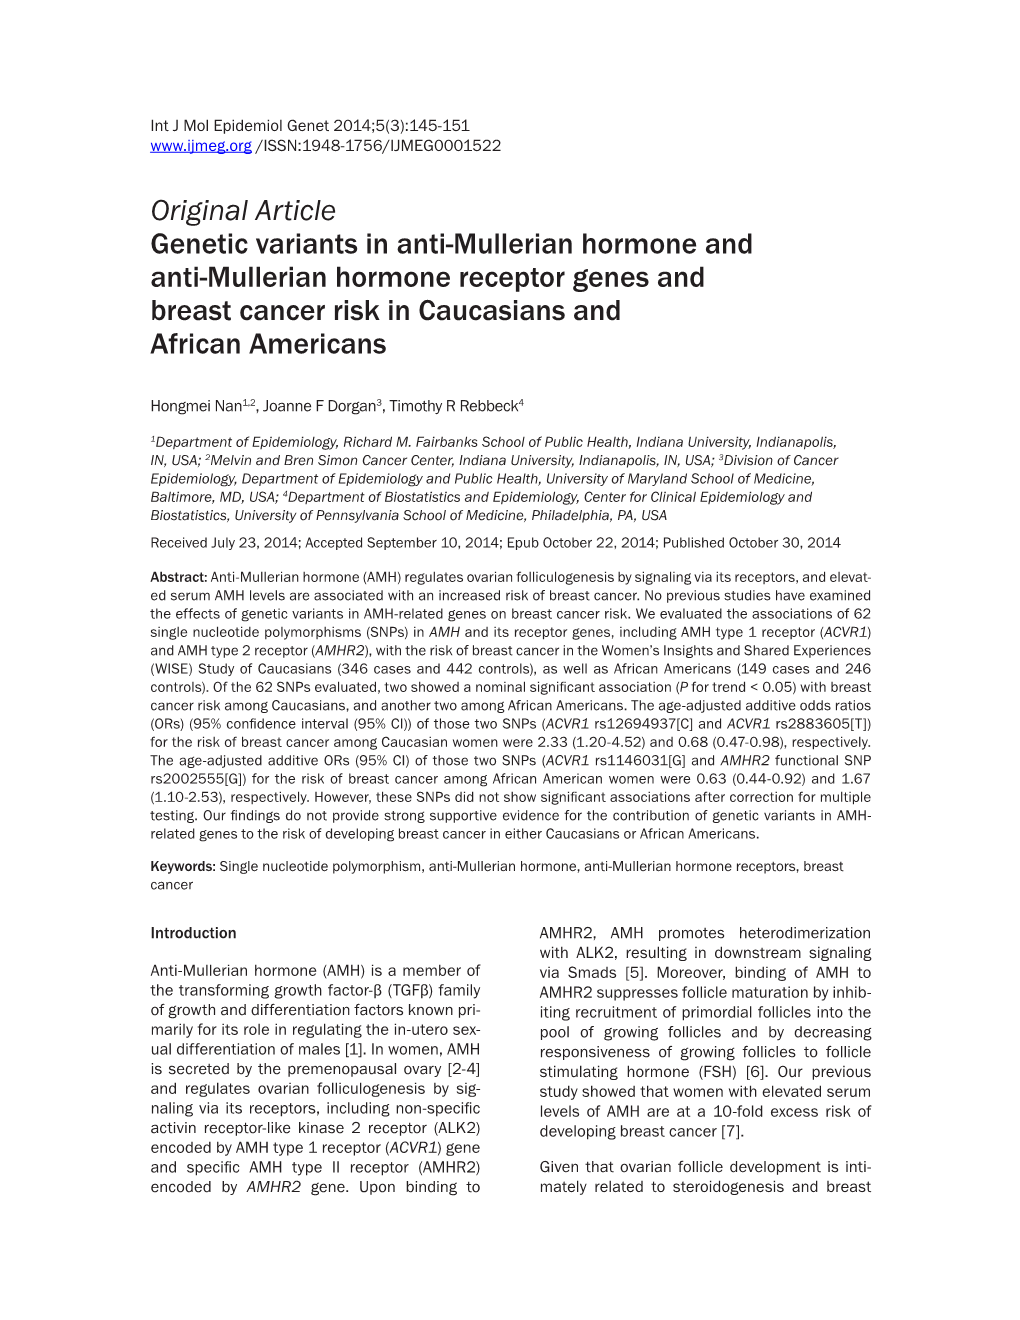 Original Article Genetic Variants in Anti-Mullerian Hormone and Anti-Mullerian Hormone Receptor Genes and Breast Cancer Risk in Caucasians and African Americans